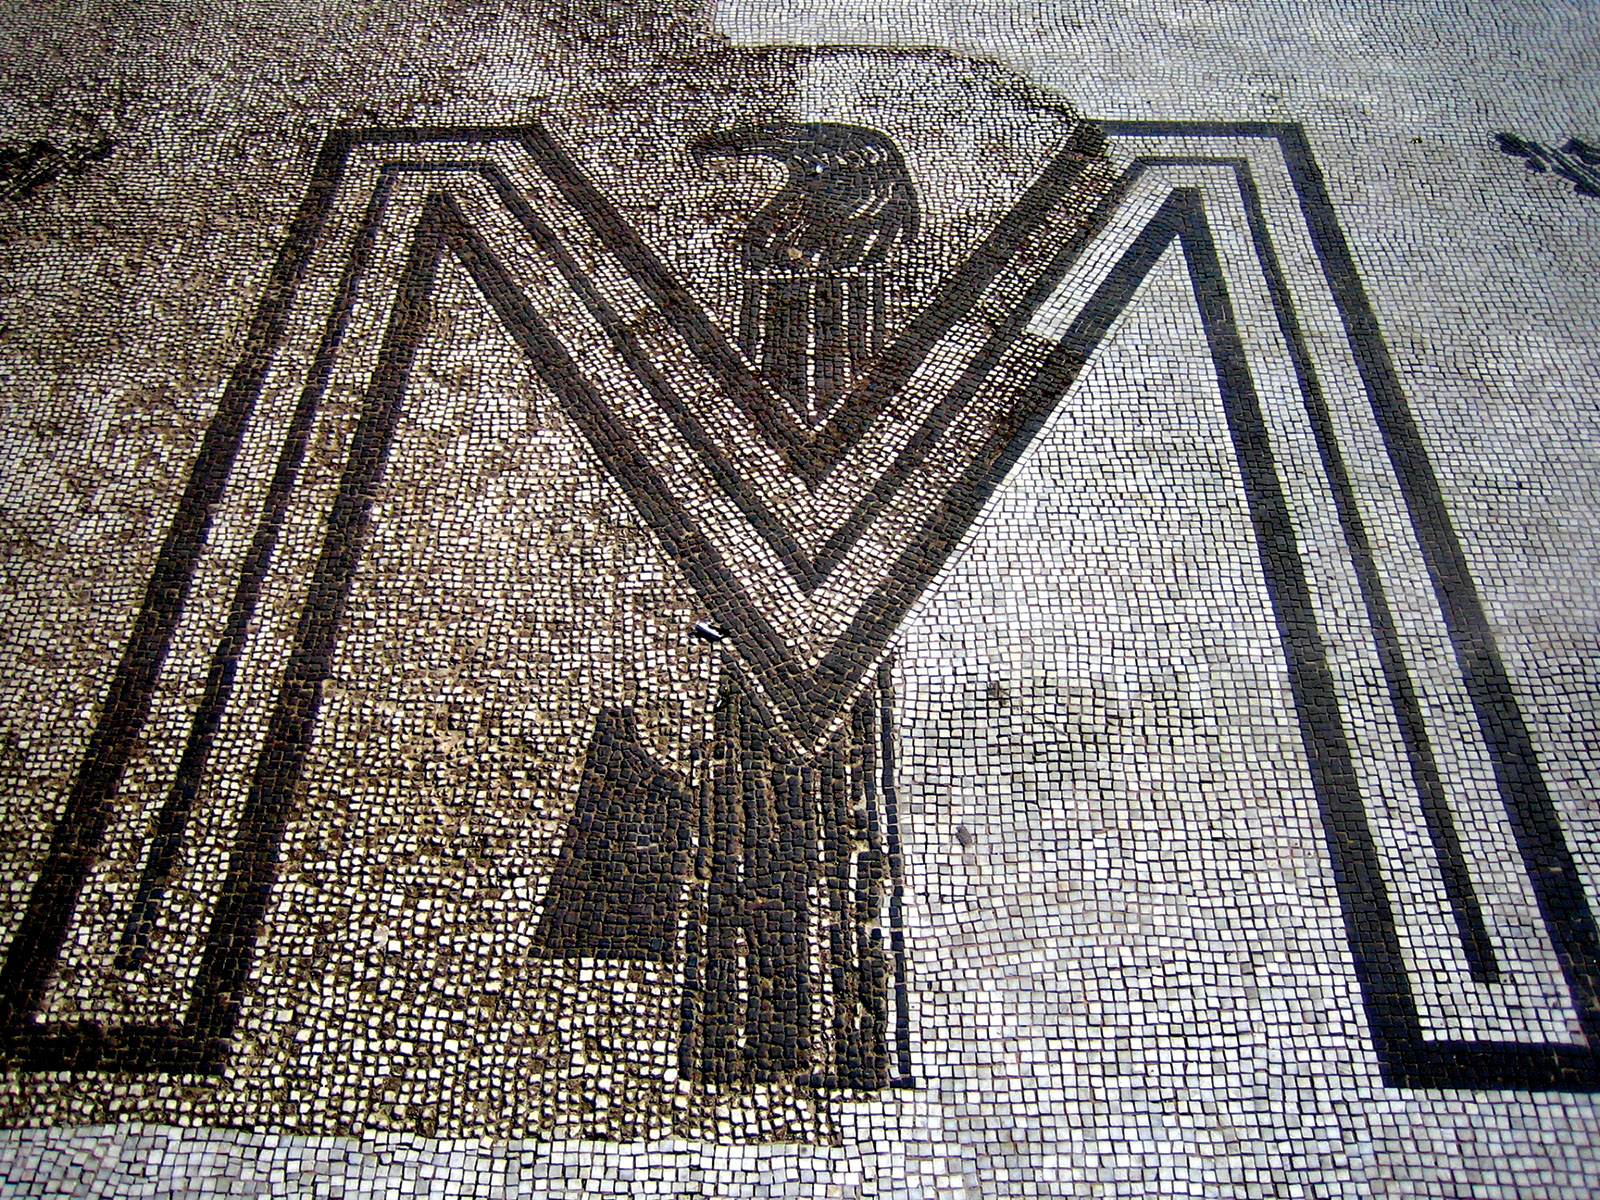 A mosaic displaying the fasces and Mussolini’s initial at the Foro Italico